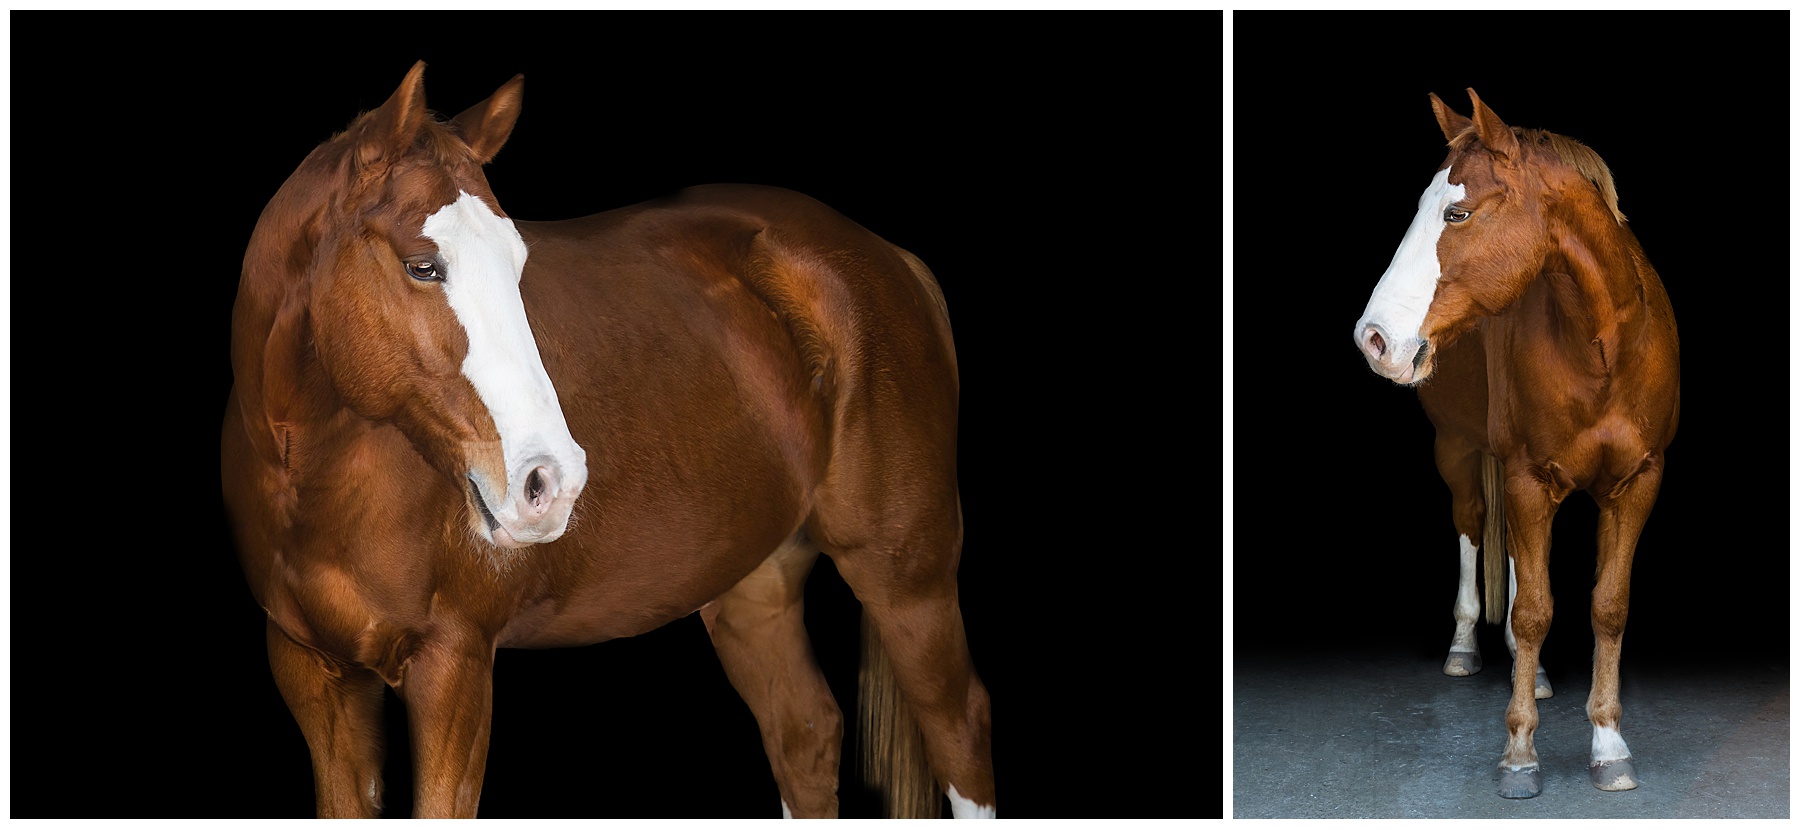 black background equine portrait of a chestnut horse with a white blaze